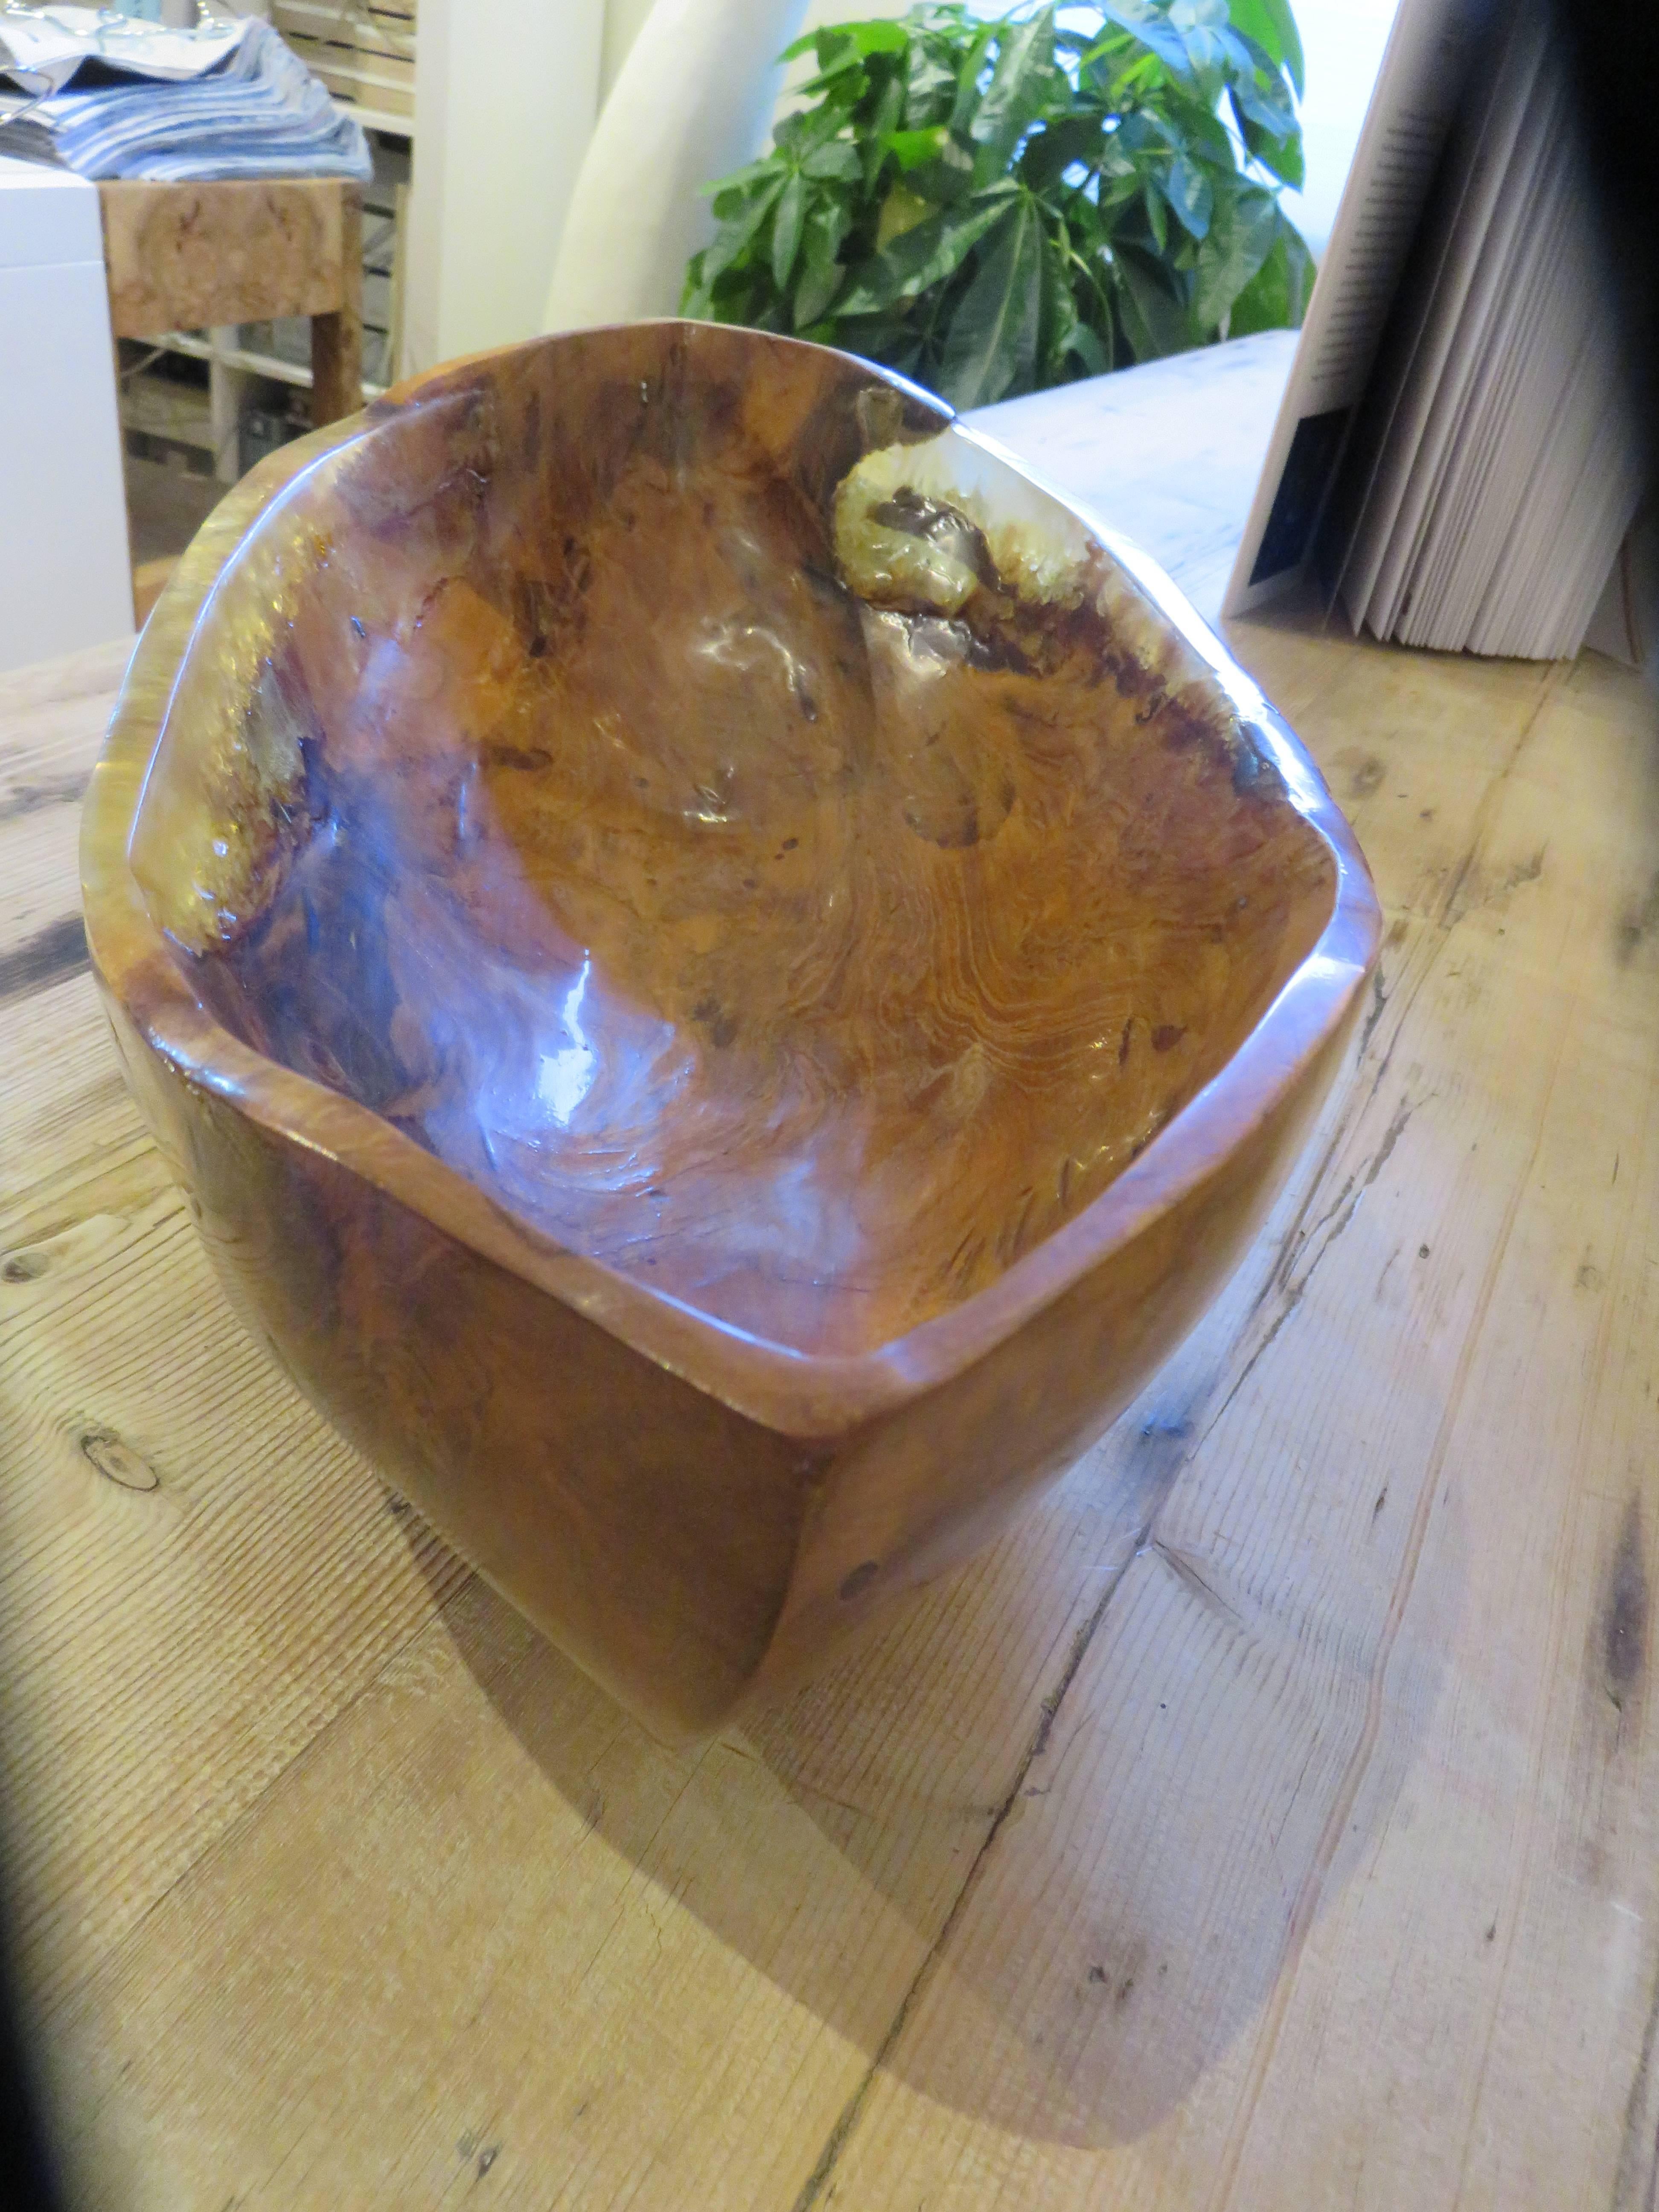 American Studio Crafted Olive Wood and Crystallized Resin Vessel by Taylor Povic